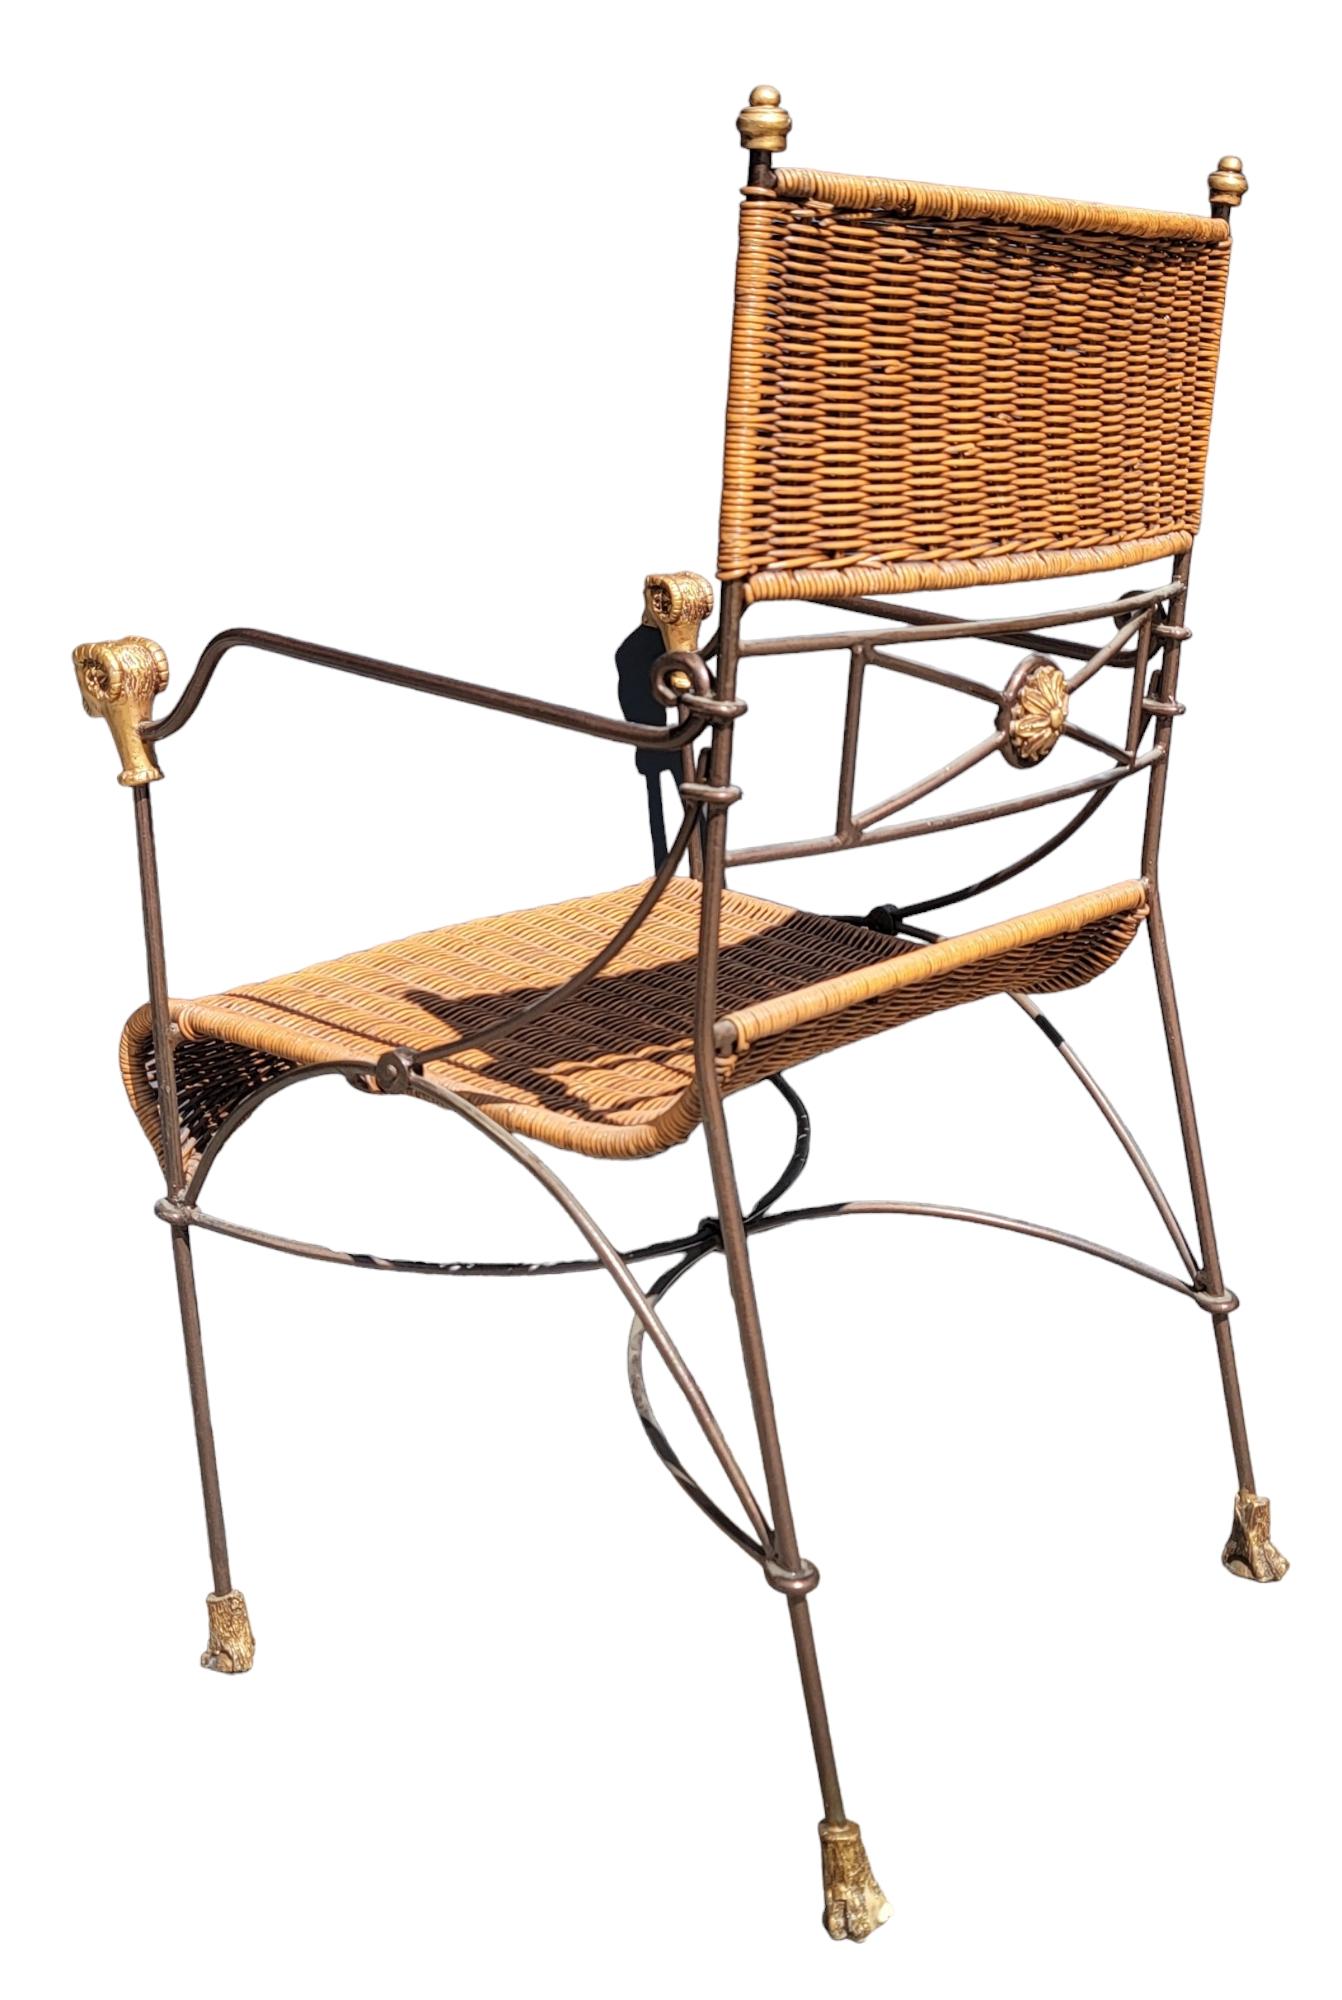 Set of Three Iron And Wicker Settee And Chair By Giacometti  1